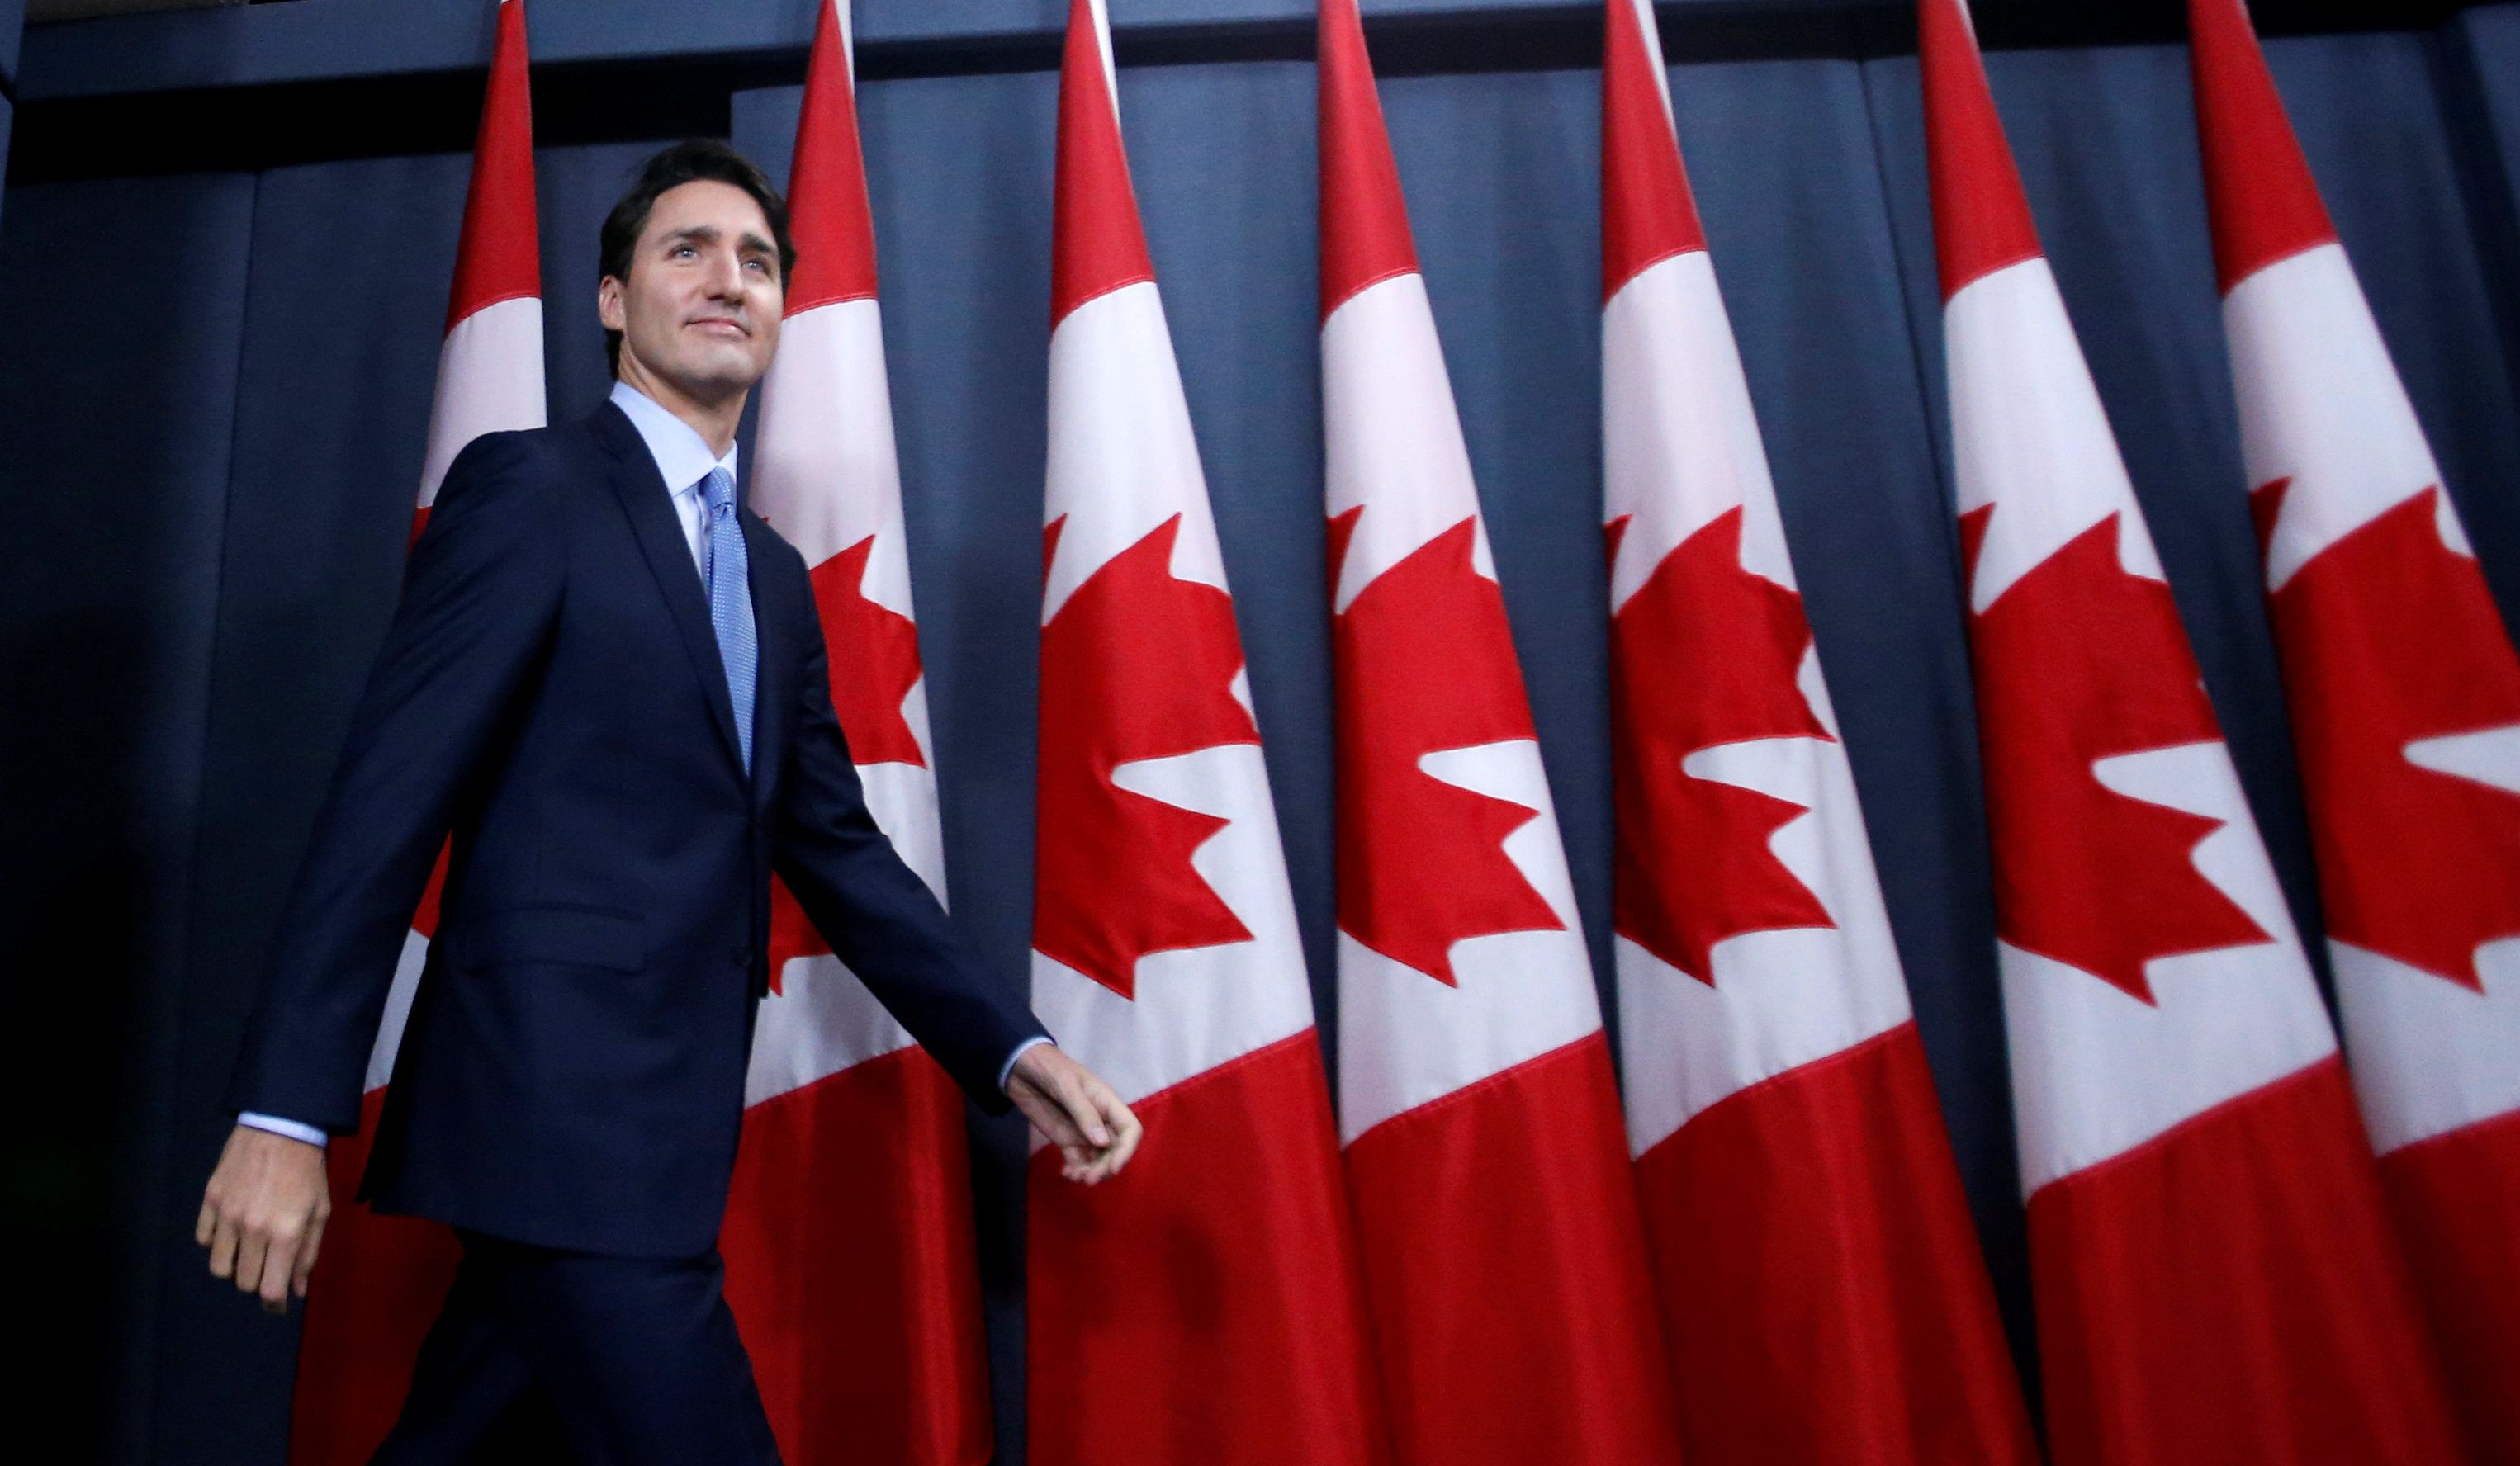 Canada's Prime Minister Justin Trudeau arrives at a news conference in Ottawa, Ontario, Canada, December 12, 2016. (Chris Wattie / REuters)